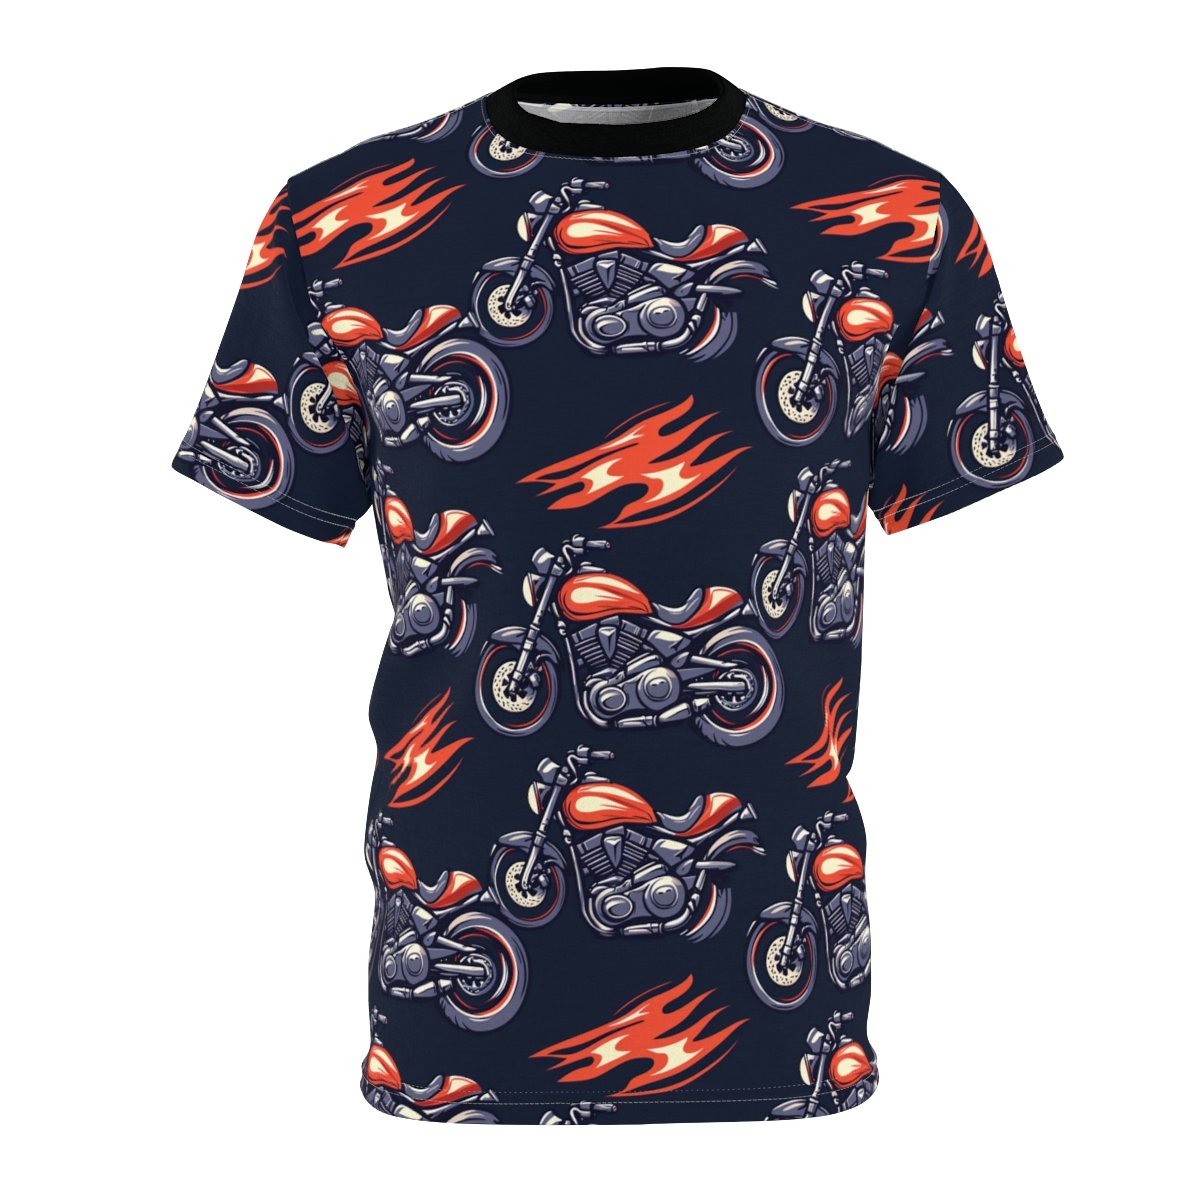 Motorcycle and Flames - Red White on Black - Unisex Cut & Sew Tee (AOP)